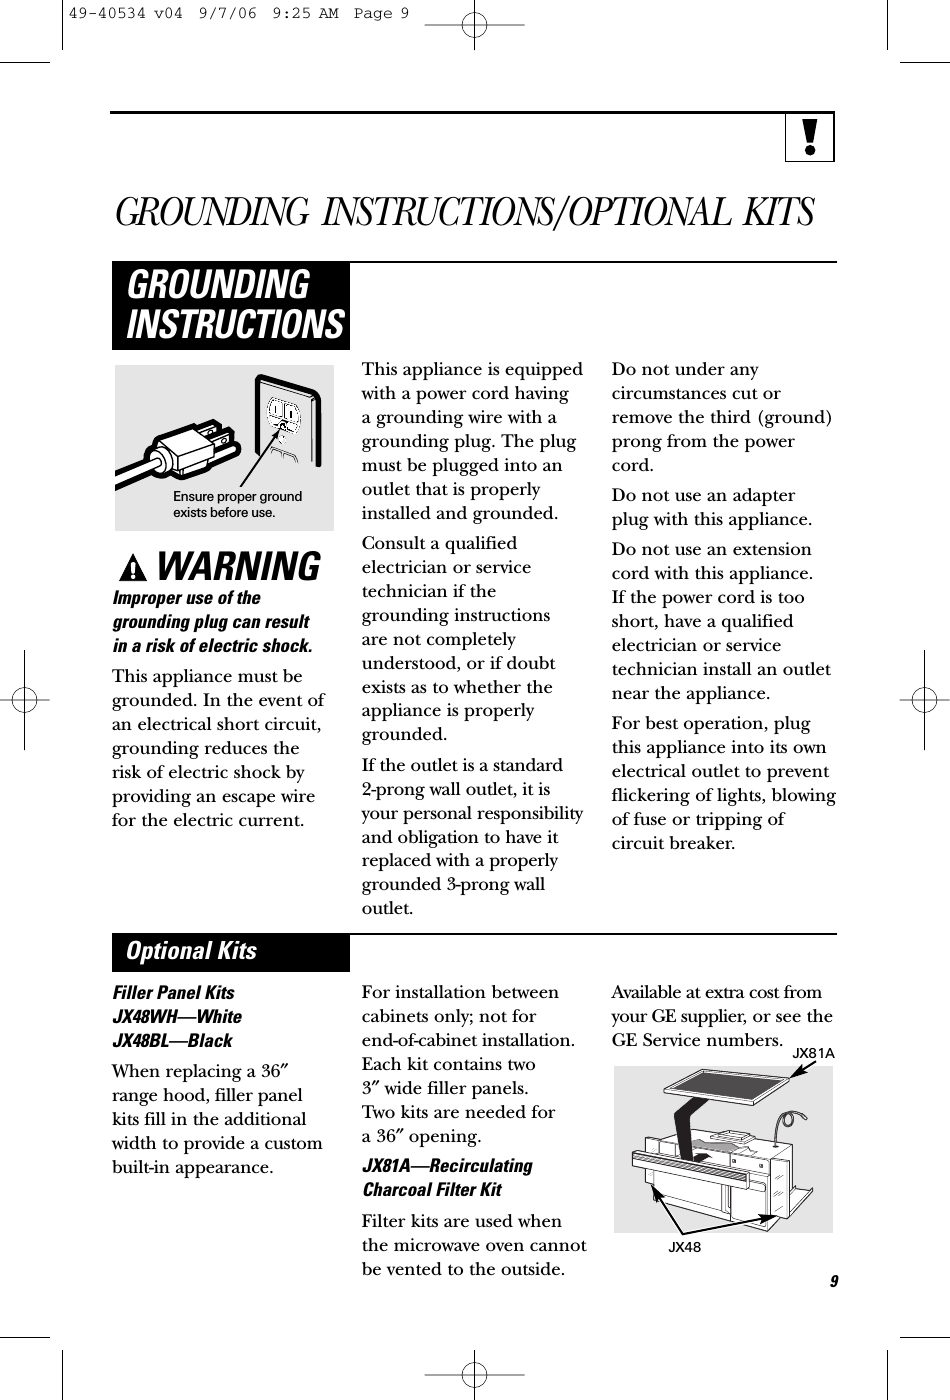 GROUNDING INSTRUCTIONS/OPTIONAL KITSWARNINGImproper use of thegrounding plug can result in a risk of electric shock.This appliance must begrounded. In the event ofan electrical short circuit,grounding reduces the risk of electric shock byproviding an escape wirefor the electric current. This appliance is equippedwith a power cord having a grounding wire with agrounding plug. The plugmust be plugged into anoutlet that is properlyinstalled and grounded.Consult a qualifiedelectrician or servicetechnician if thegrounding instructions are not completely understood, or if doubtexists as to whether theappliance is properlygrounded.If the outlet is a standard 2-prong wall outlet, it isyour personal responsibilityand obligation to have itreplaced with a properlygrounded 3-prong walloutlet.Do not under any circumstances cut orremove the third (ground)prong from the powercord.Do not use an adapter plug with this appliance.Do not use an extensioncord with this appliance. If the power cord is tooshort, have a qualifiedelectrician or servicetechnician install an outletnear the appliance.For best operation, plugthis appliance into its ownelectrical outlet to preventflickering of lights, blowingof fuse or tripping ofcircuit breaker.GROUNDINGINSTRUCTIONSFiller Panel KitsJX48WH—WhiteJX48BL—BlackWhen replacing a 36″range hood, filler panelkits fill in the additionalwidth to provide a custombuilt-in appearance. For installation betweencabinets only; not for end-of-cabinet installation.Each kit contains two 3″wide filler panels. Two kits are needed for a 36″opening.JX81A—RecirculatingCharcoal Filter KitFilter kits are used whenthe microwave oven cannotbe vented to the outside.Available at extra cost fromyour GE supplier, or see theGE Service numbers.Optional KitsEnsure proper groundexists before use.JX81AJX48949-40534 v04  9/7/06  9:25 AM  Page 9